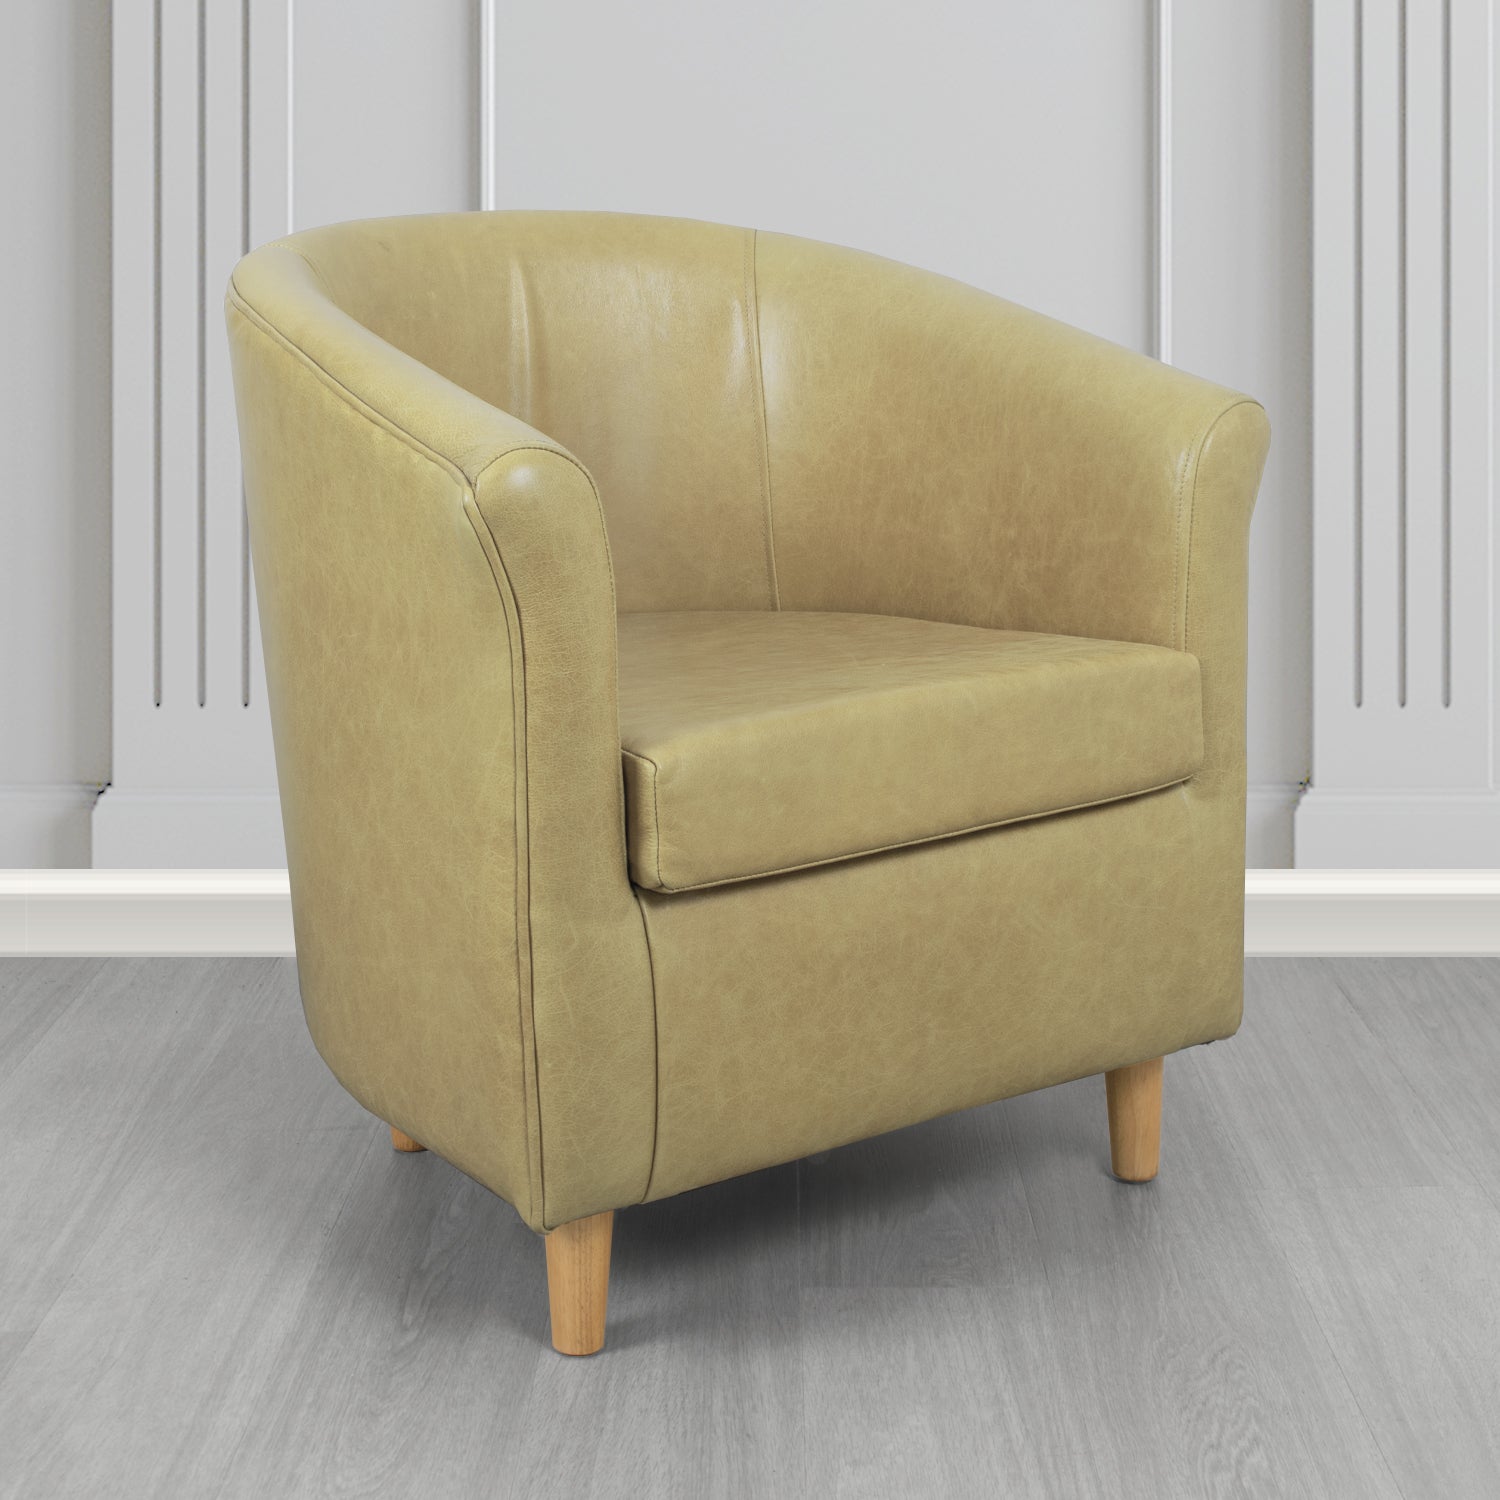 Tuscany Tub Chair in Crib 5 Old English Parchment Genuine Leather - The Tub Chair Shop